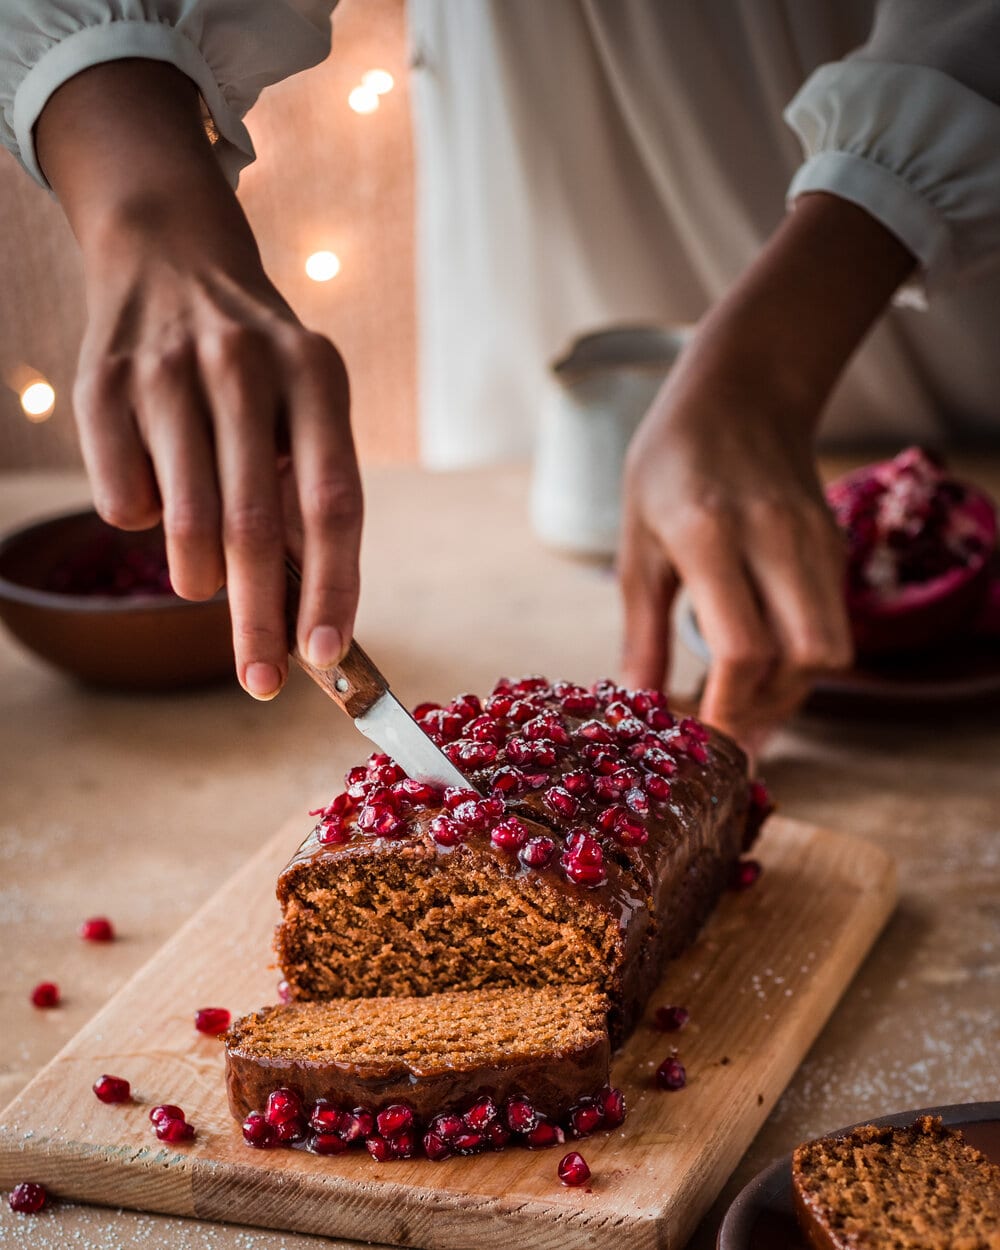 Woman slicing gingerbread cake with pomegranate seeds on a wood cutting board.